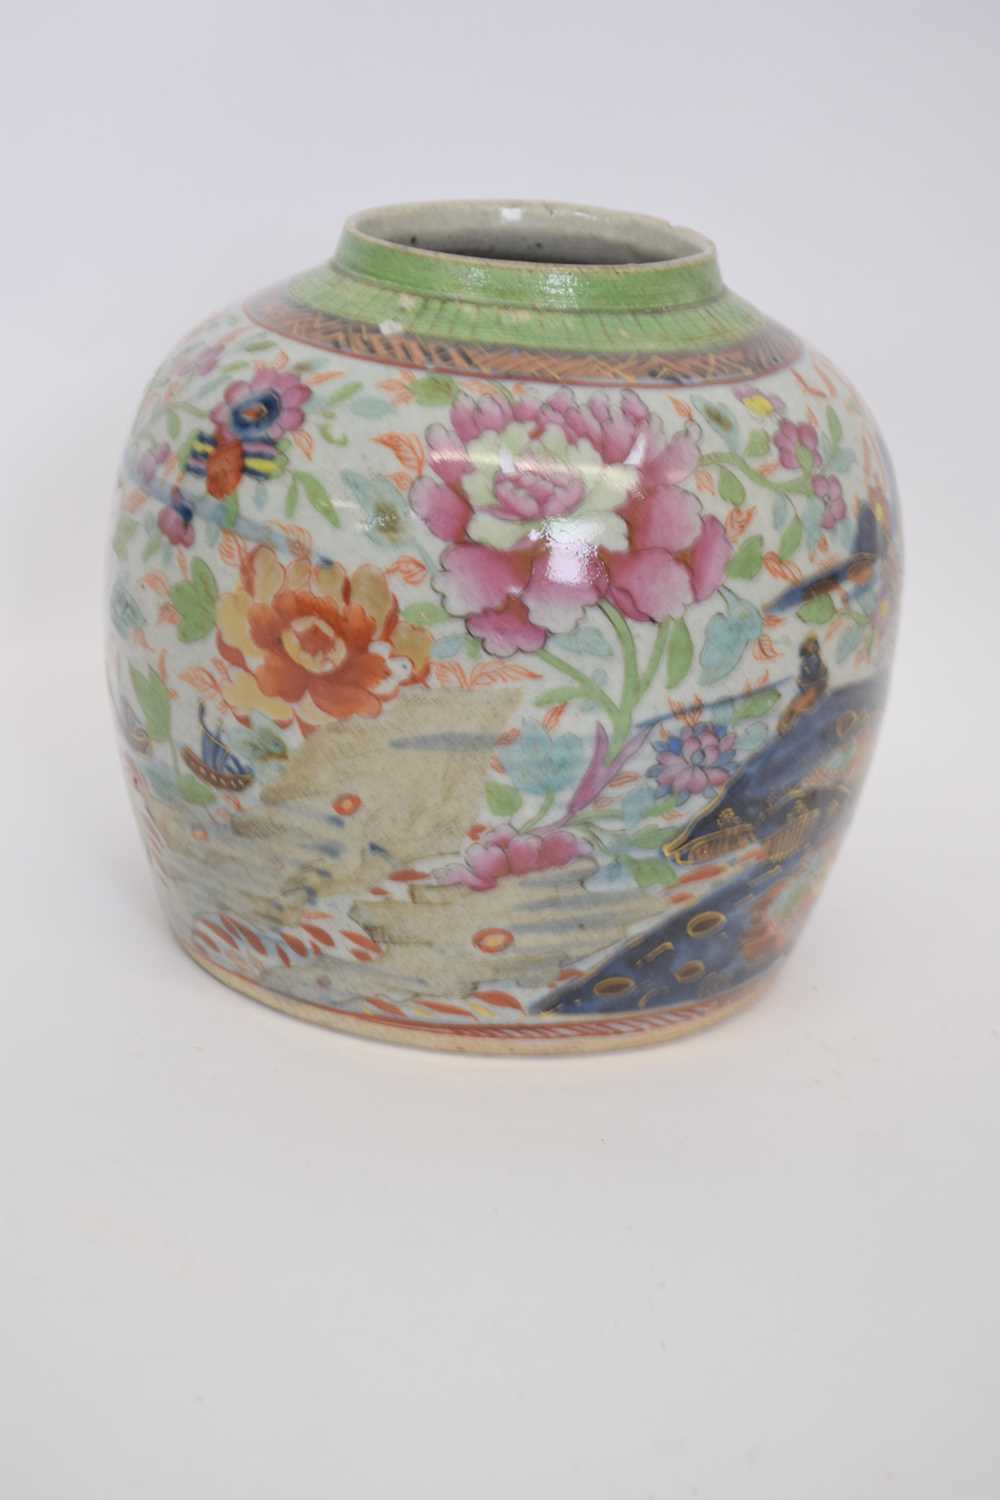 Late 18th/early 19th century Chinese porcelain ginger jar with overglaze European decoration - Image 4 of 6